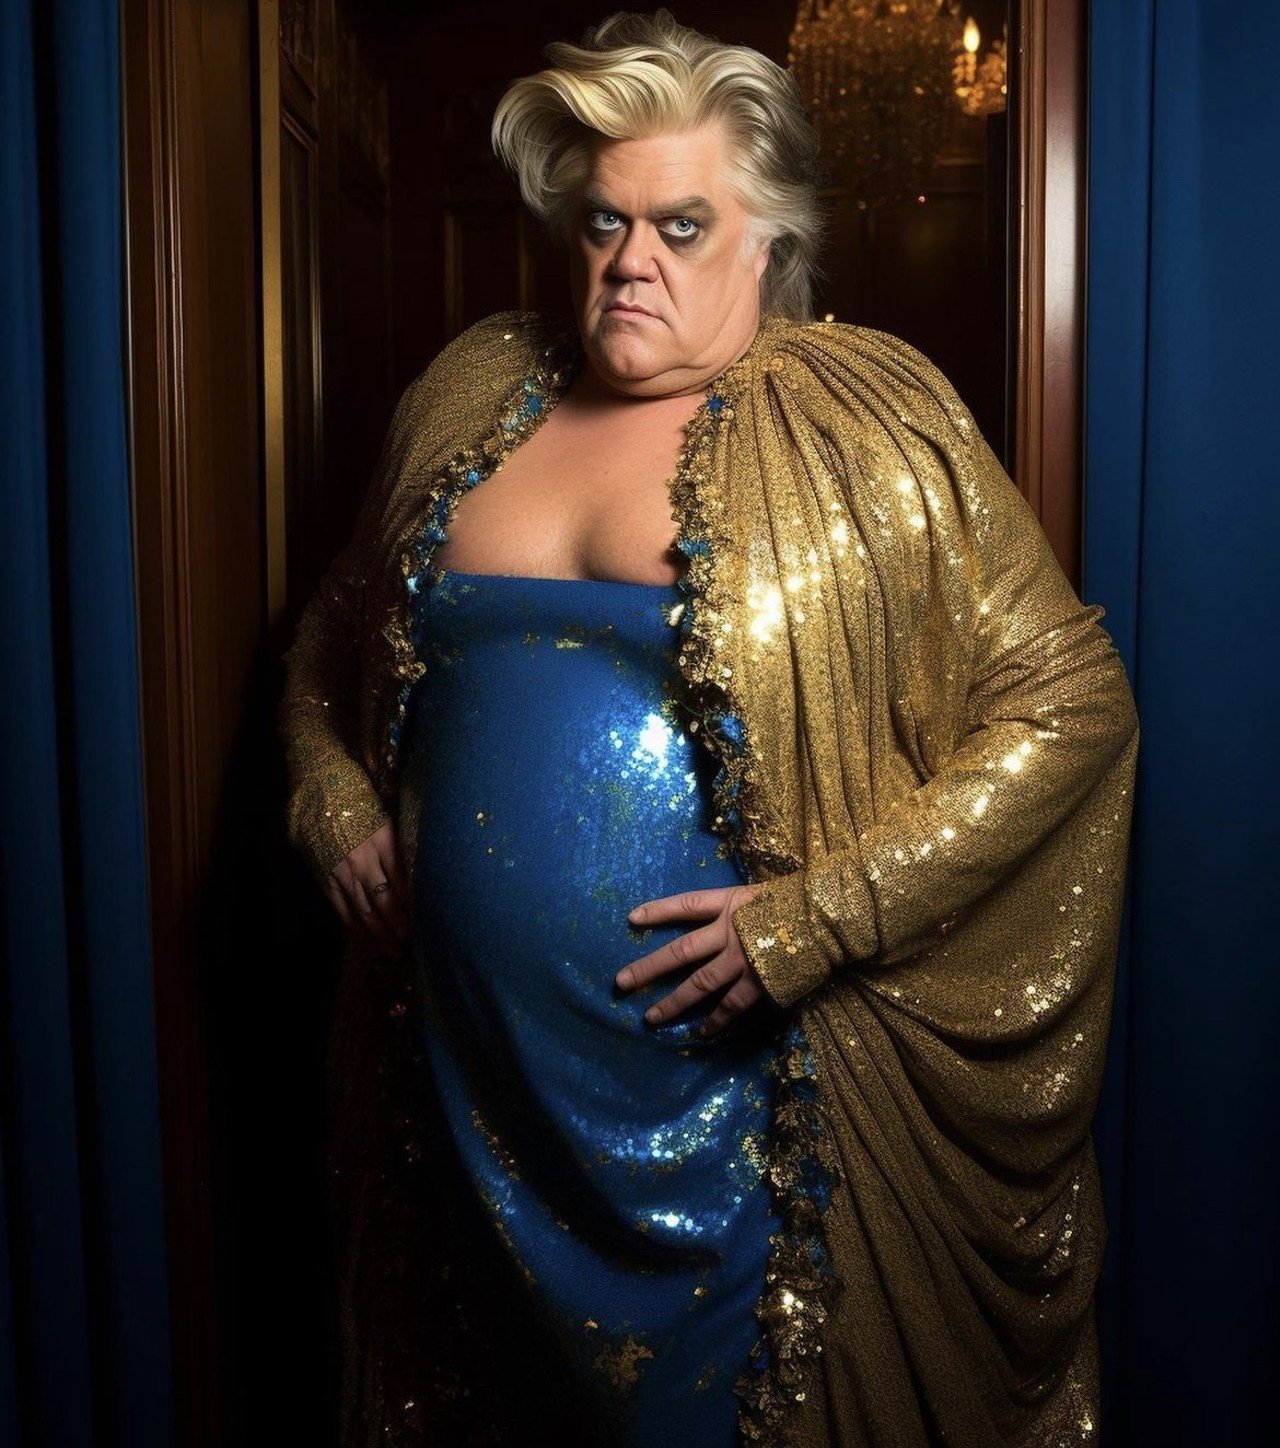  Steve Bannon  
&#147;Miss Misinformation - Serving washed-up media mogul realness, Bombshell Bannon fires off conspiracy theories faster than Florida can criminalize where you poopoo kaka. Since Trump dropped her ass, she&#146;s been roaming the streets of Washington looking for her next trick. DeSanty, text a gurl back! #rupublicans&#148; 